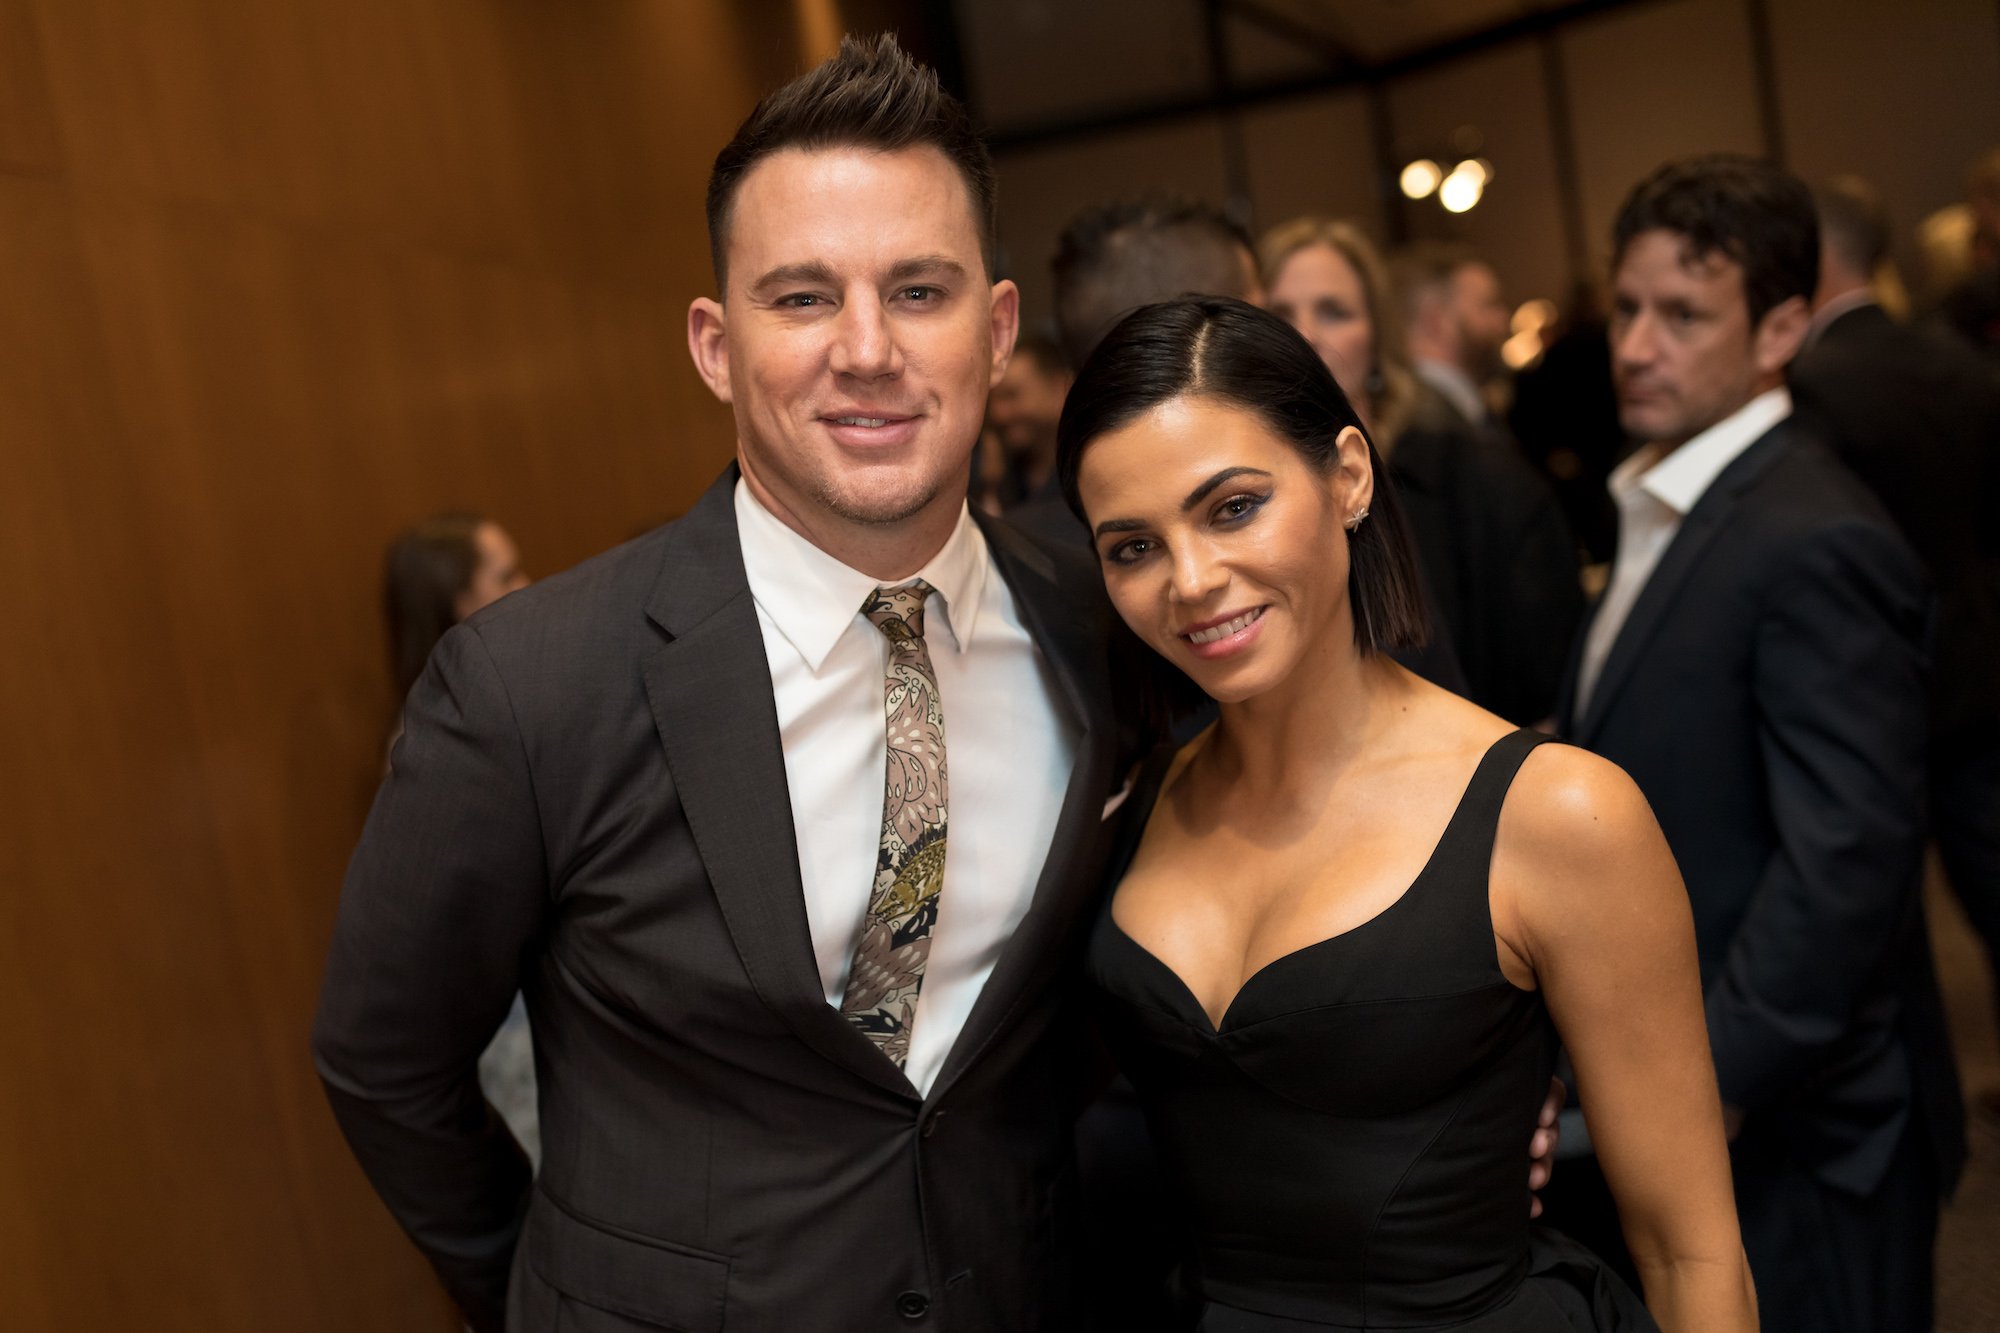 Channing Tatum and Jenna Dewan smiling in front of a crowd